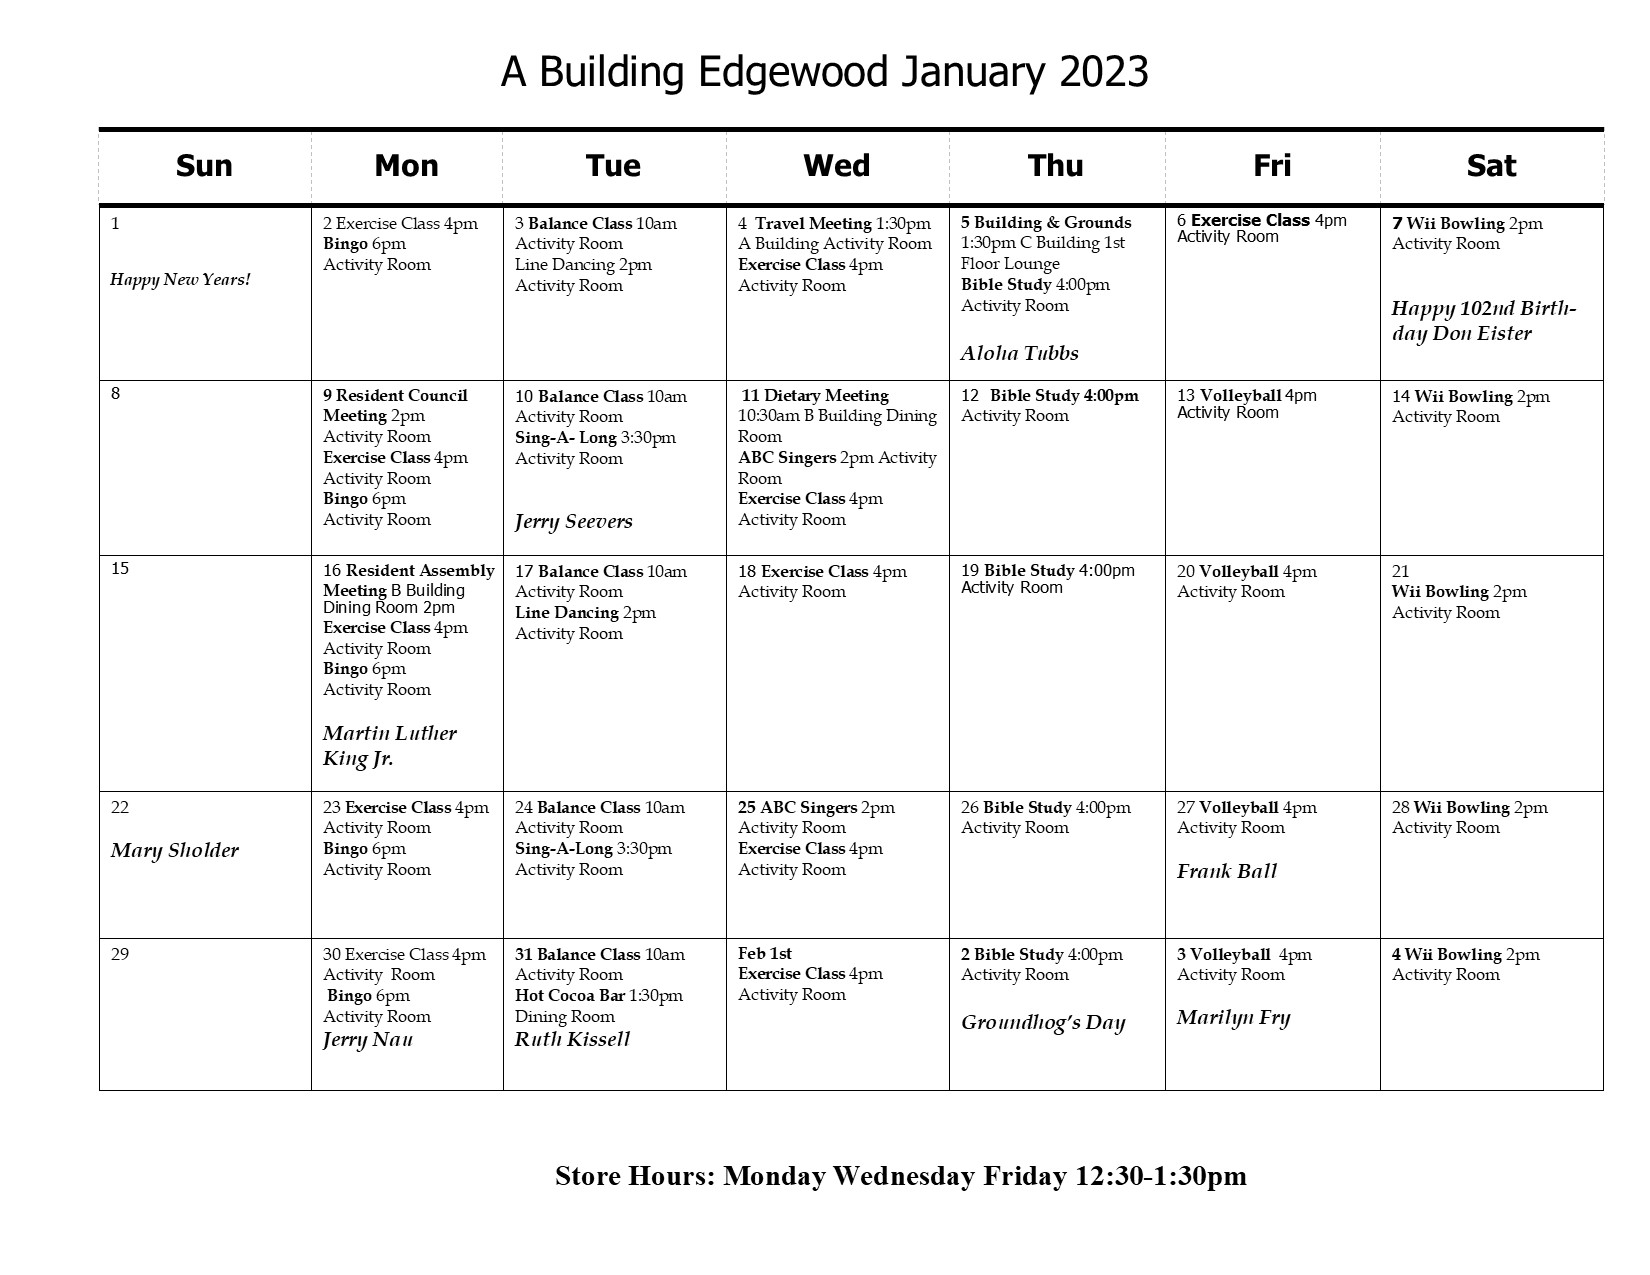 A Building January 2023